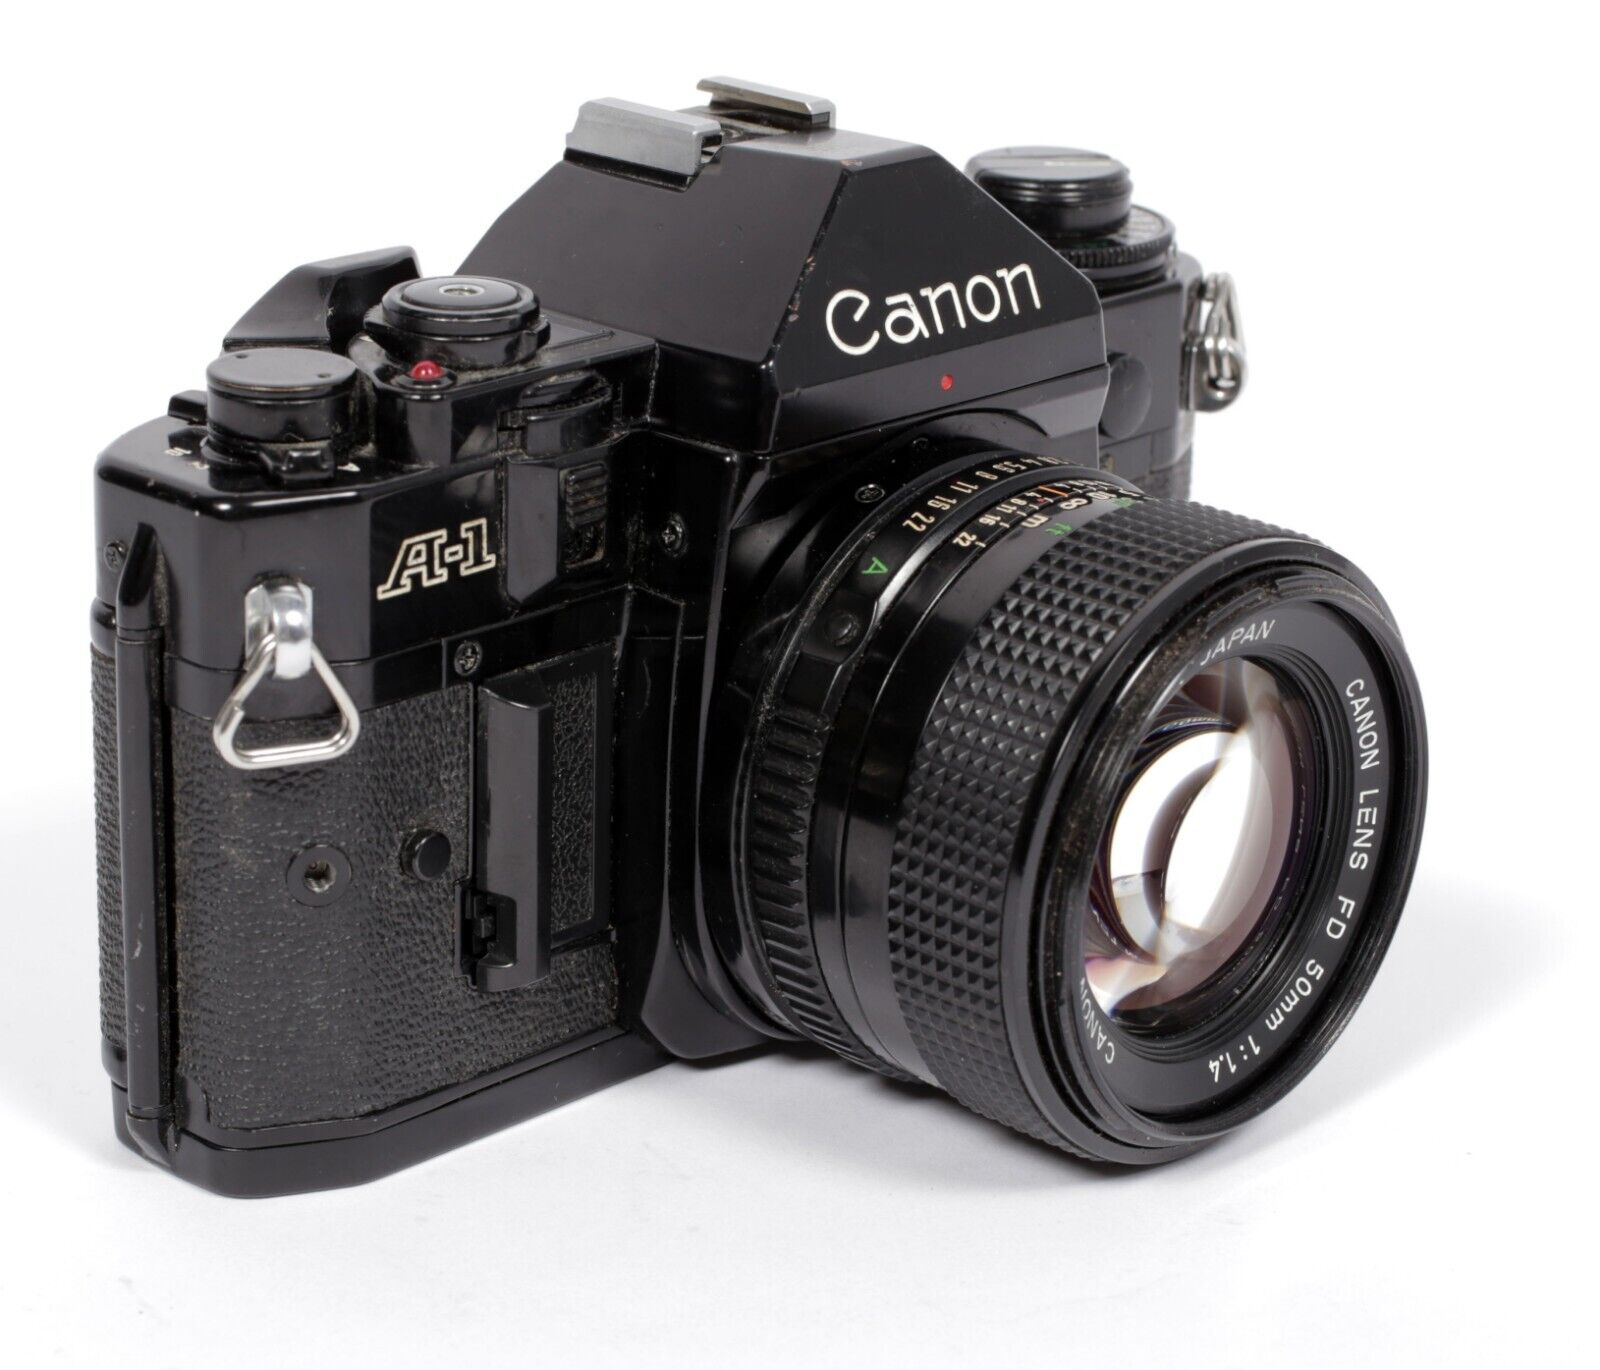 Canon A-1 35mm SLR Film Camera with 50mm F1.8 or F1.4 lens (6 